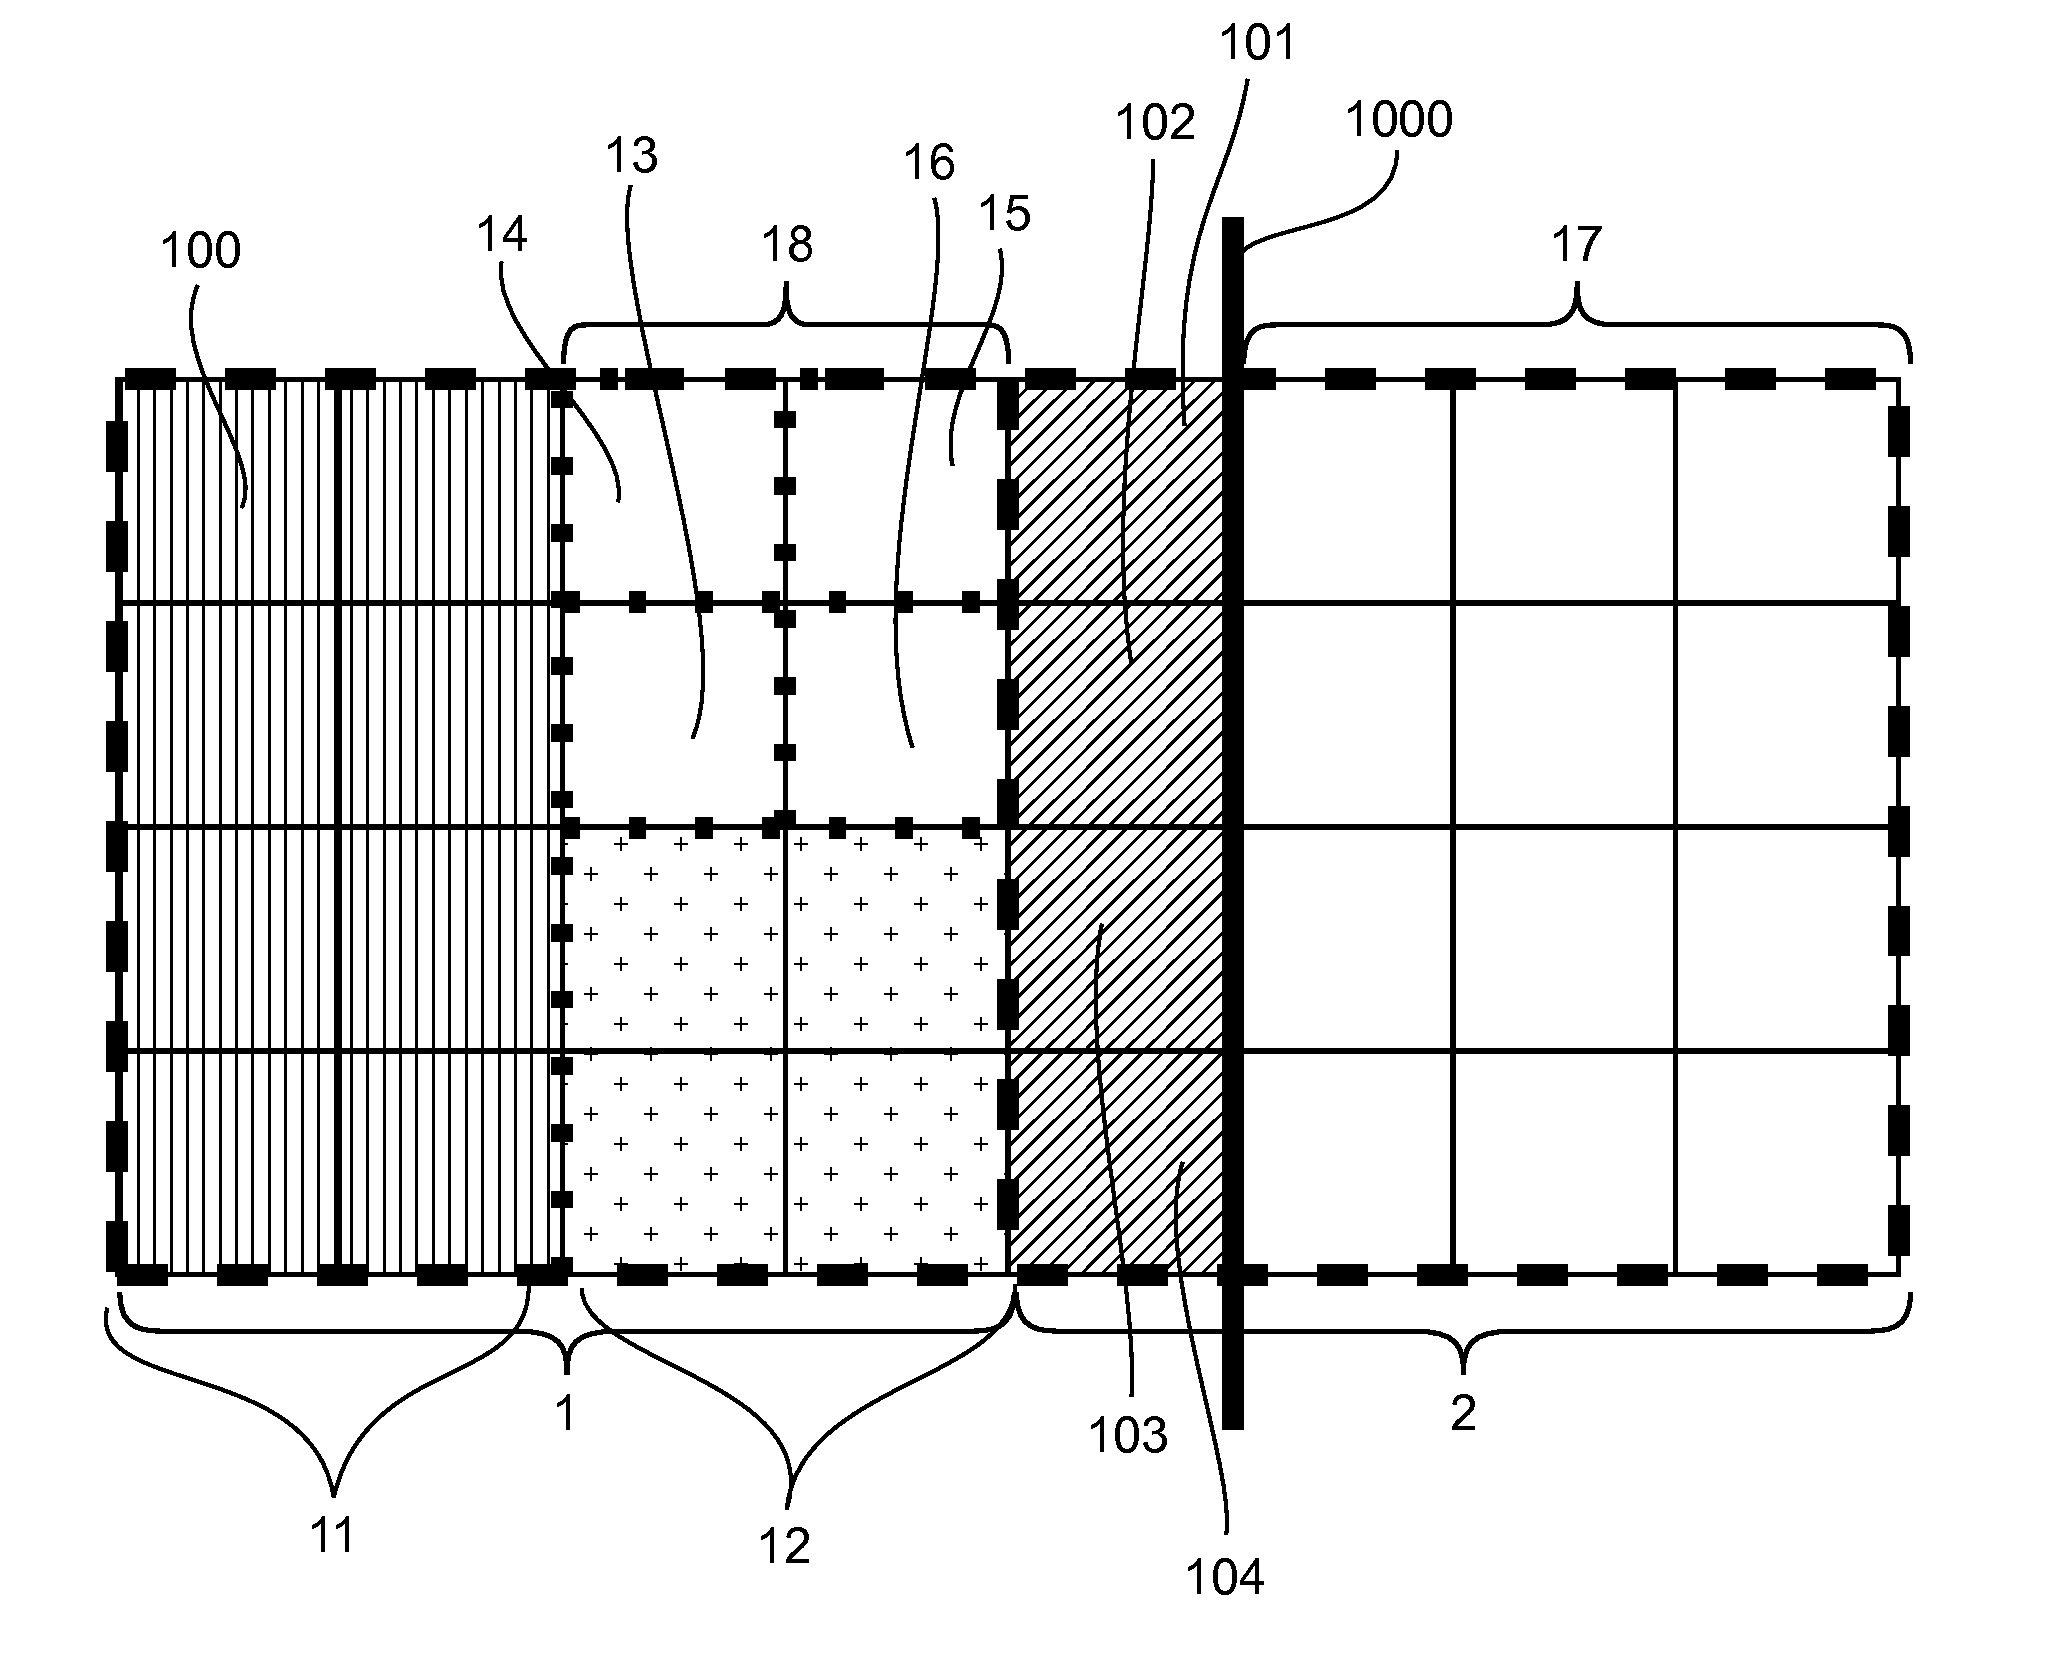 Method for encoding and decoding images, encoding and decoding devices, corresponding data streams and computer program